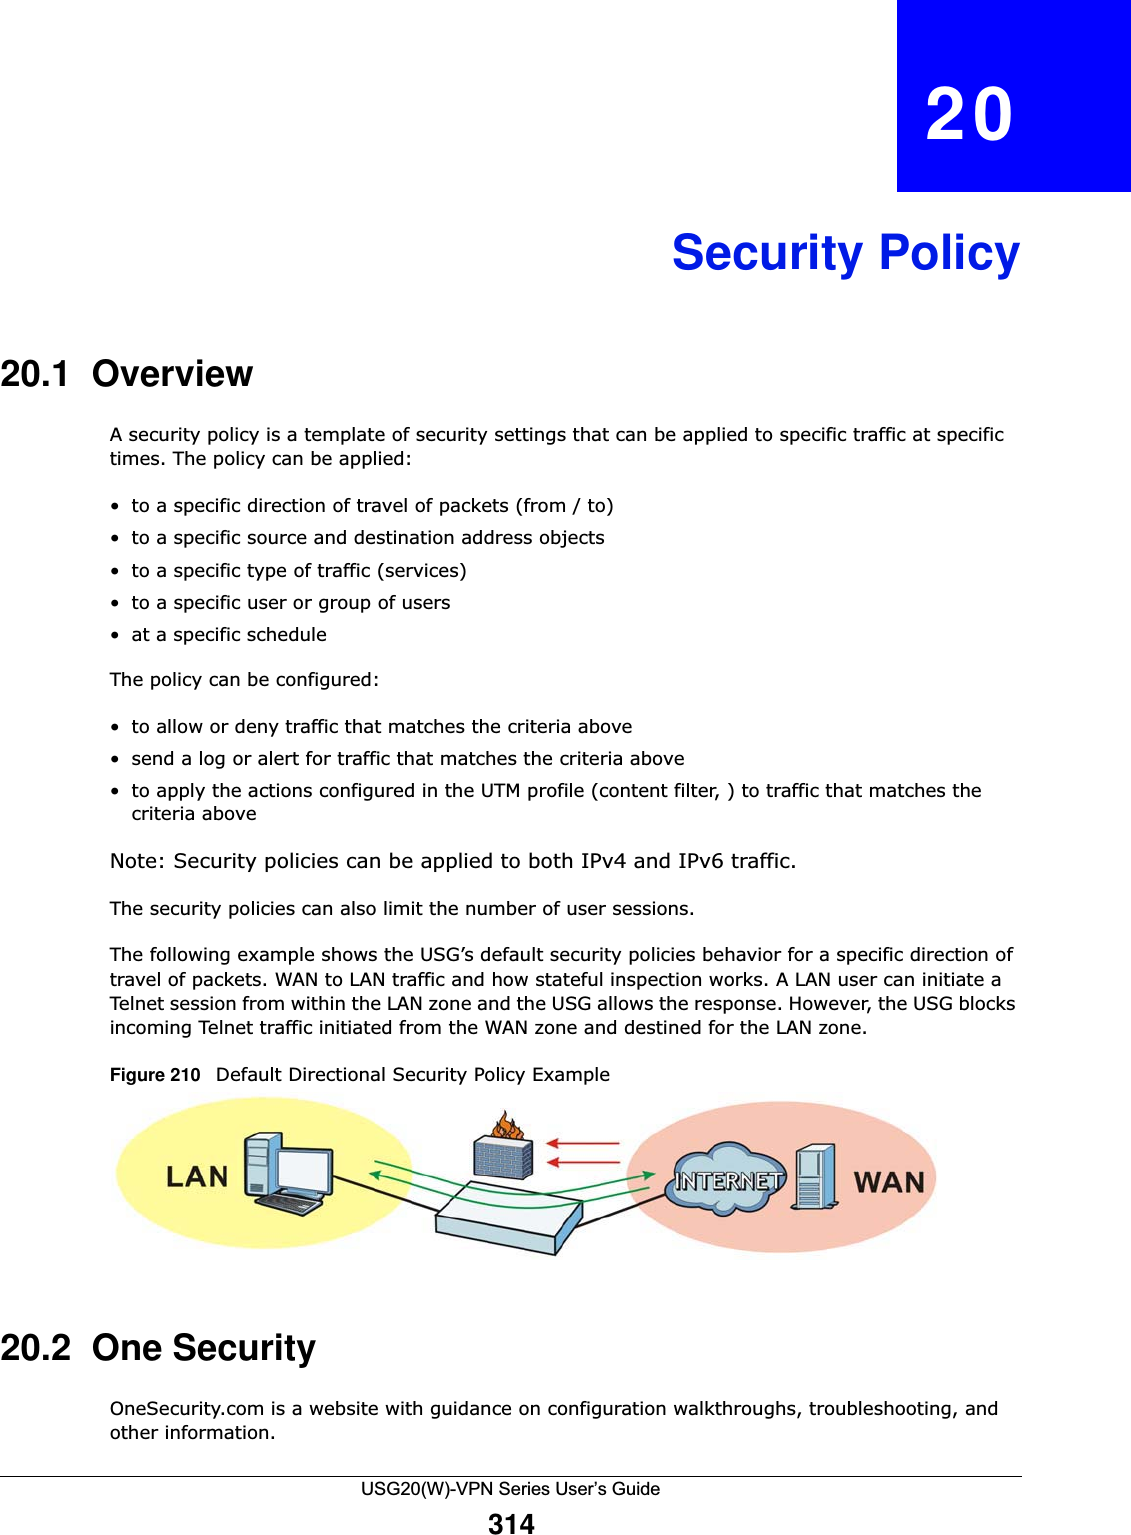 USG20(W)-VPN Series User’s Guide314CHAPTER   20Security Policy20.1  OverviewA security policy is a template of security settings that can be applied to specific traffic at specific times. The policy can be applied:• to a specific direction of travel of packets (from / to) • to a specific source and destination address objects• to a specific type of traffic (services)• to a specific user or group of users• at a specific scheduleThe policy can be configured:• to allow or deny traffic that matches the criteria above • send a log or alert for traffic that matches the criteria above • to apply the actions configured in the UTM profile (content filter, ) to traffic that matches the criteria above Note: Security policies can be applied to both IPv4 and IPv6 traffic.The security policies can also limit the number of user sessions.The following example shows the USG’s default security policies behavior for a specific direction of travel of packets. WAN to LAN traffic and how stateful inspection works. A LAN user can initiate a Telnet session from within the LAN zone and the USG allows the response. However, the USG blocks incoming Telnet traffic initiated from the WAN zone and destined for the LAN zone. Figure 210   Default Directional Security Policy Example       20.2  One SecurityOneSecurity.com is a website with guidance on configuration walkthroughs, troubleshooting, and other information. 